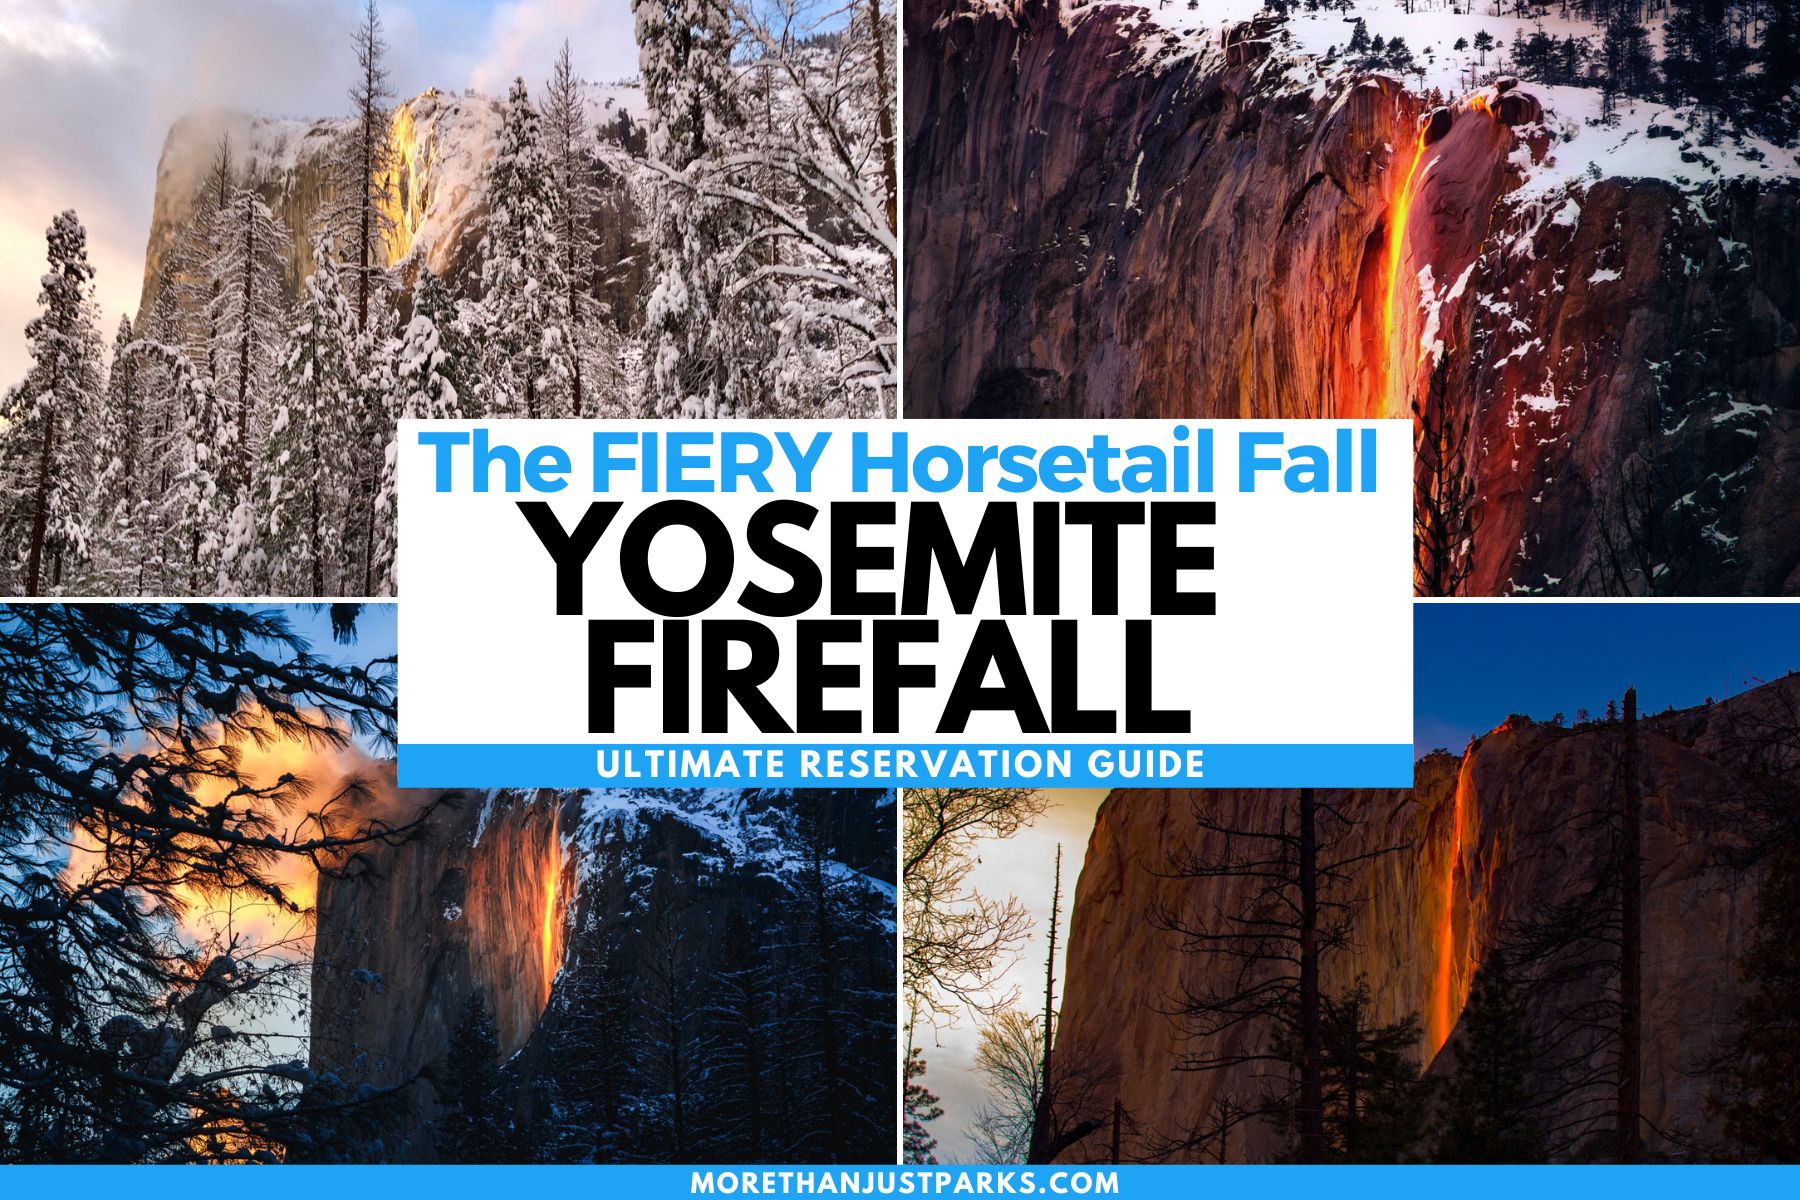 The Fiery Horsetail Fall Yosemite Firefall Ultimate Reservation Guide